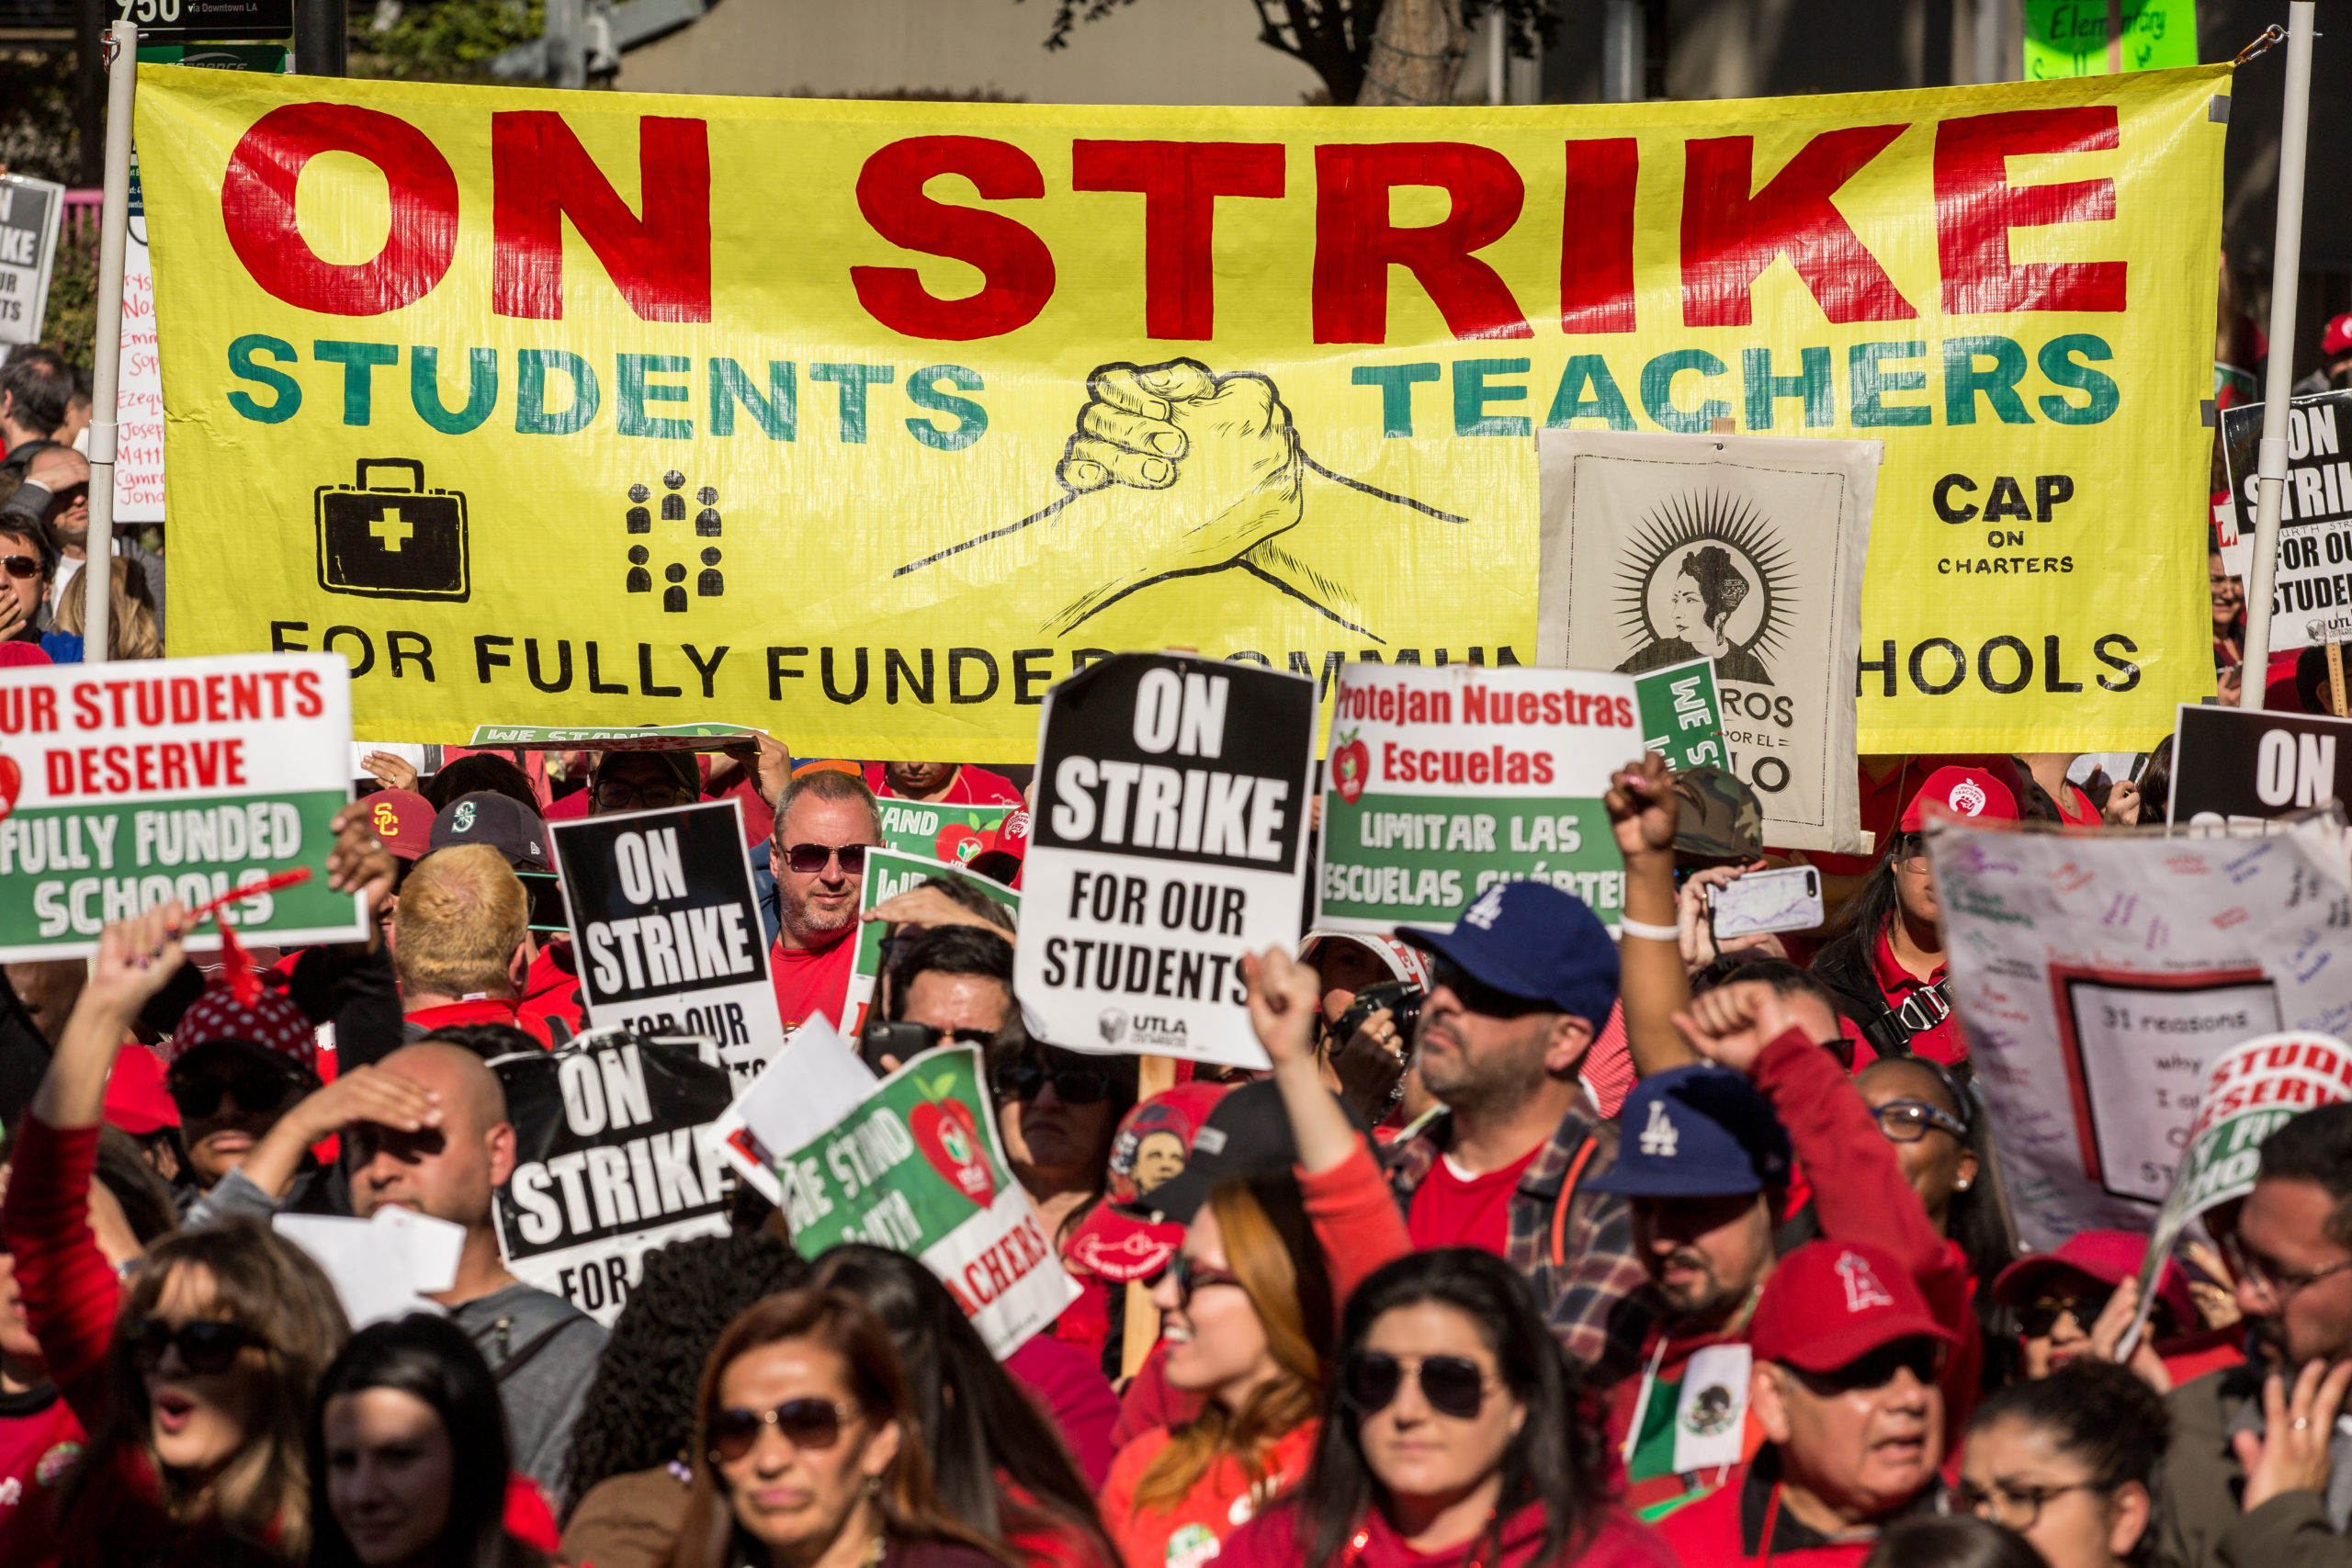 Educators, parents, students, and supporters of the Los Angeles teachers strike wave and cheer in Grand Park on January 22, 2019 in downtown Los Angeles, California.Thousands of striking teachers cheered for victory at the rally after it was announced that a tentative deal between the United Teachers of Los Angeles union and the Los Angeles Unified School District heavily favored educators' demands including a cap on rising class sizes, funding for school nurses, and a significant pay increase. (Photo by Scott Heins/Getty Images)